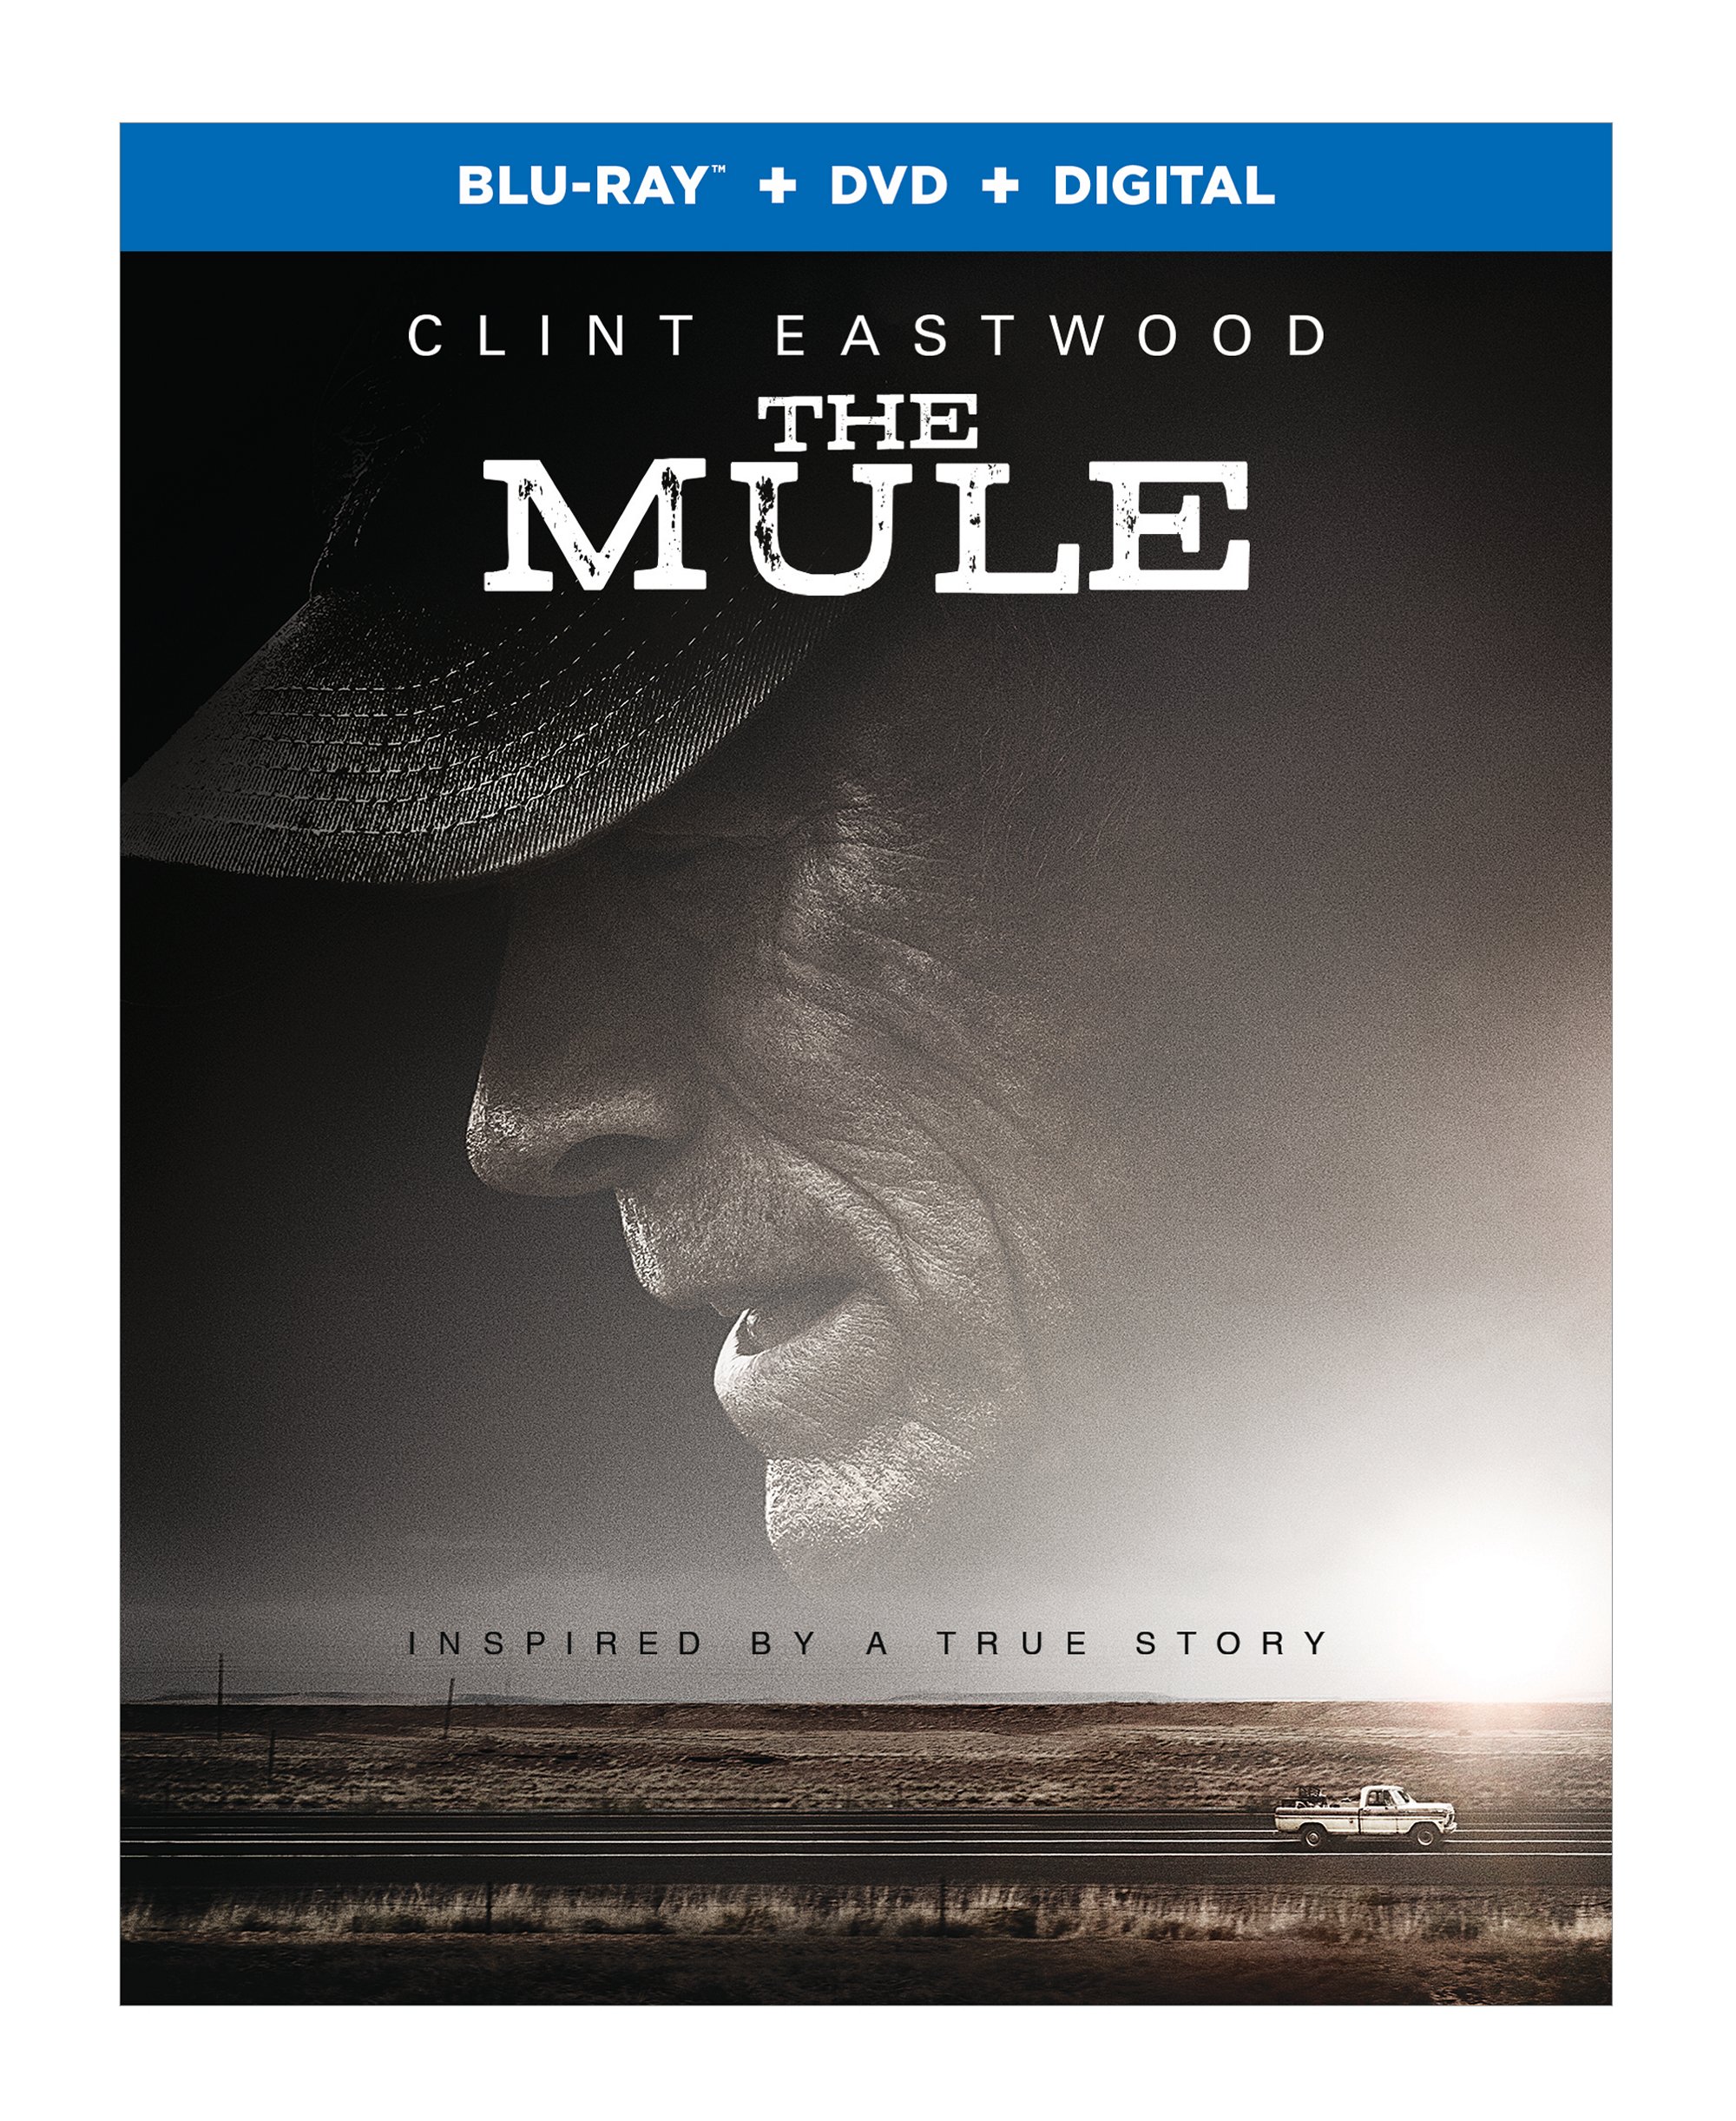 The Mule Blu-Ray Combo Pack cover (Warner Bros. Home Entertainment